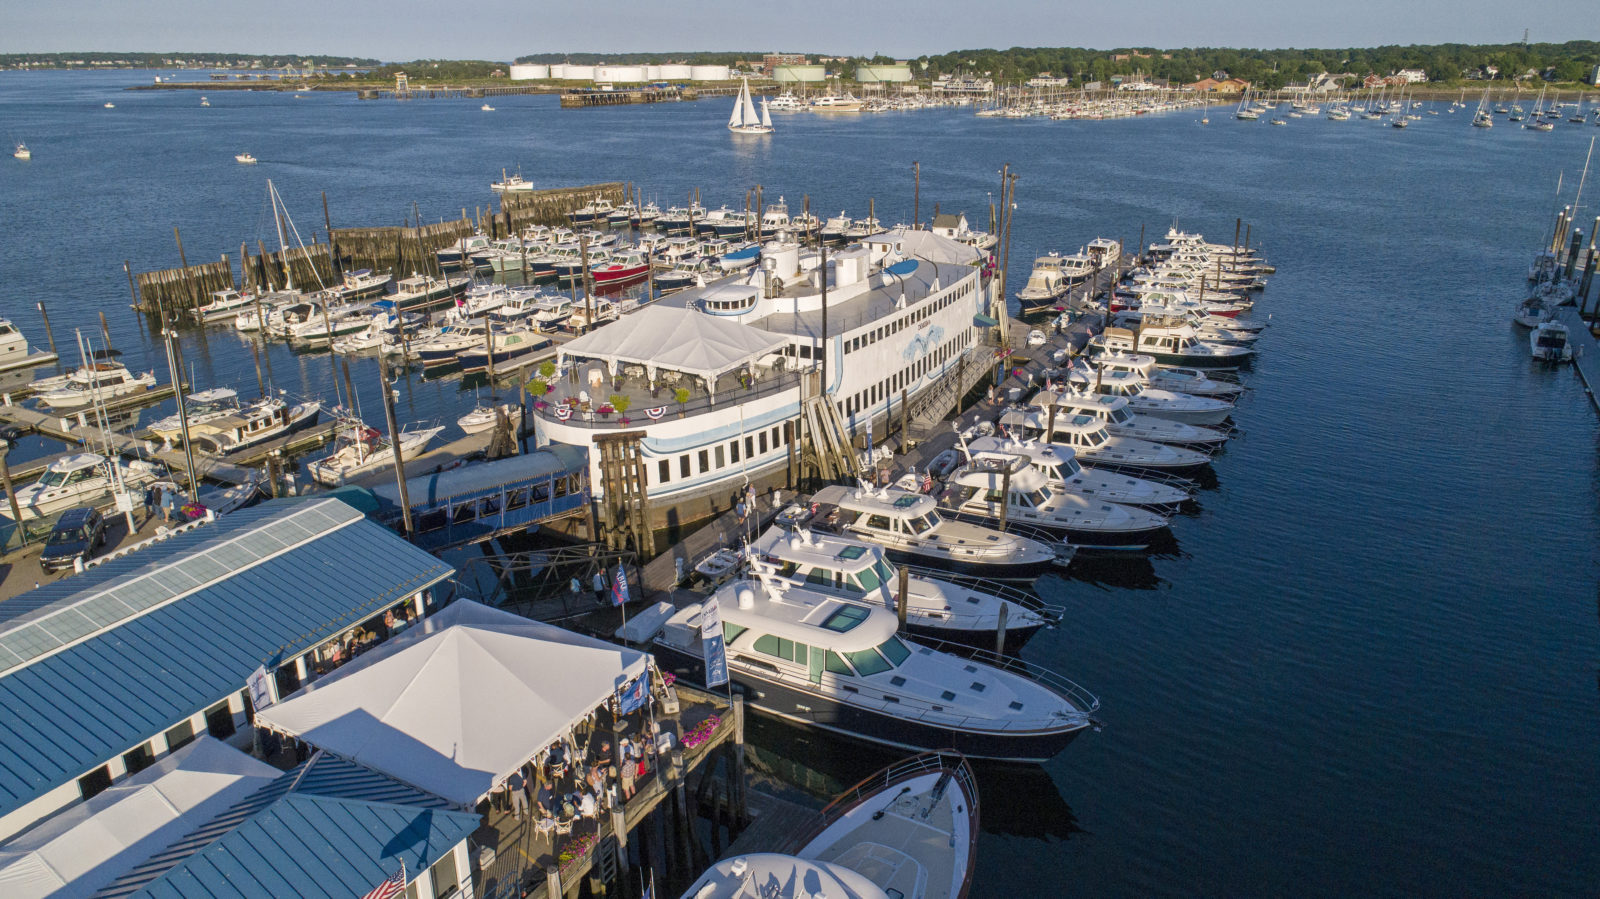 dimillo's old port yacht sales